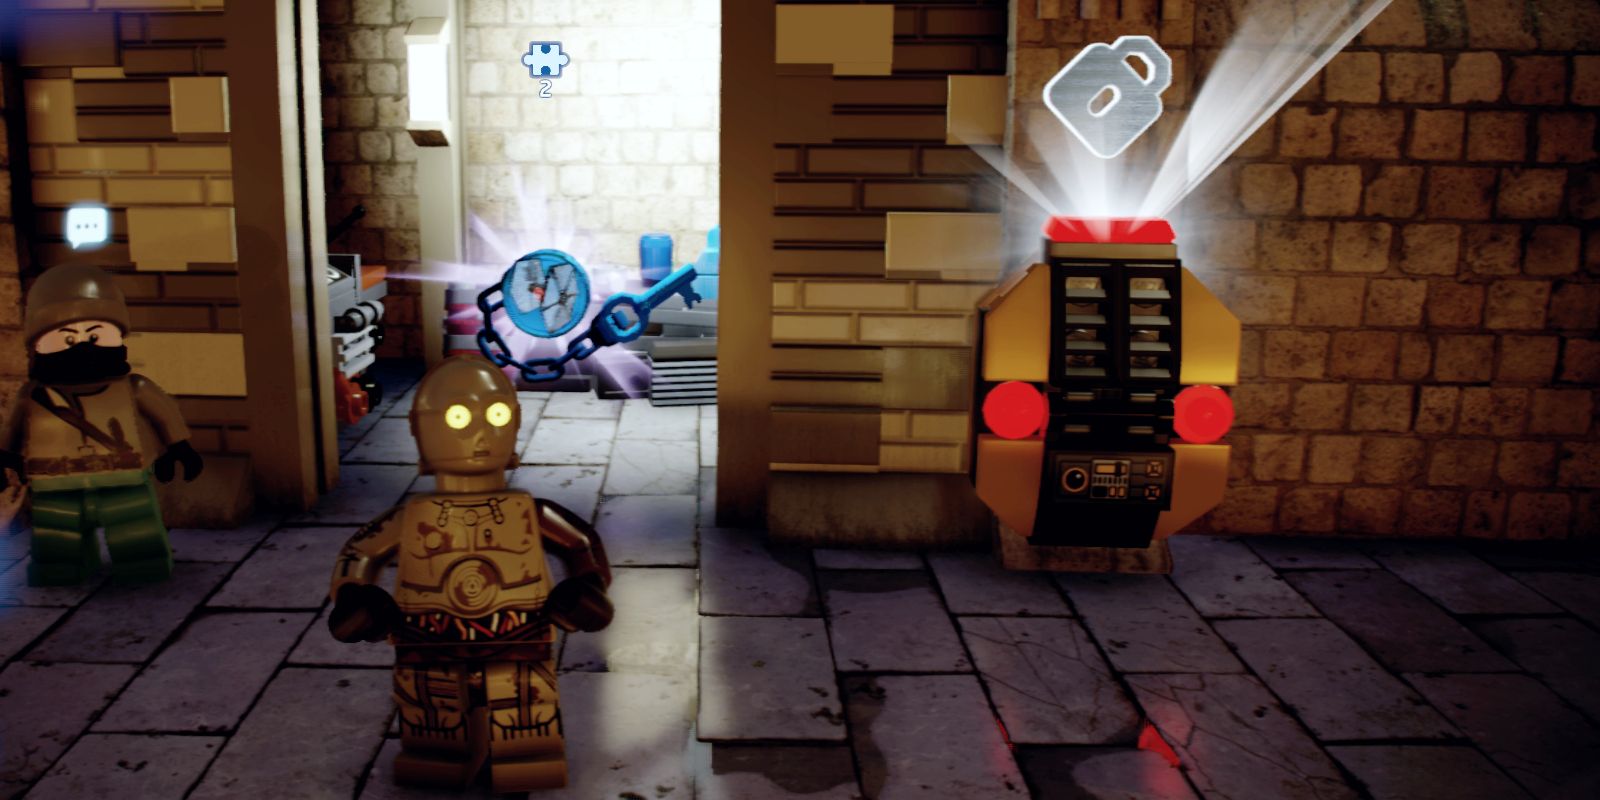 C3P0 standing next to a LEGO guard in Canto Bight in LEGO Star Wars 